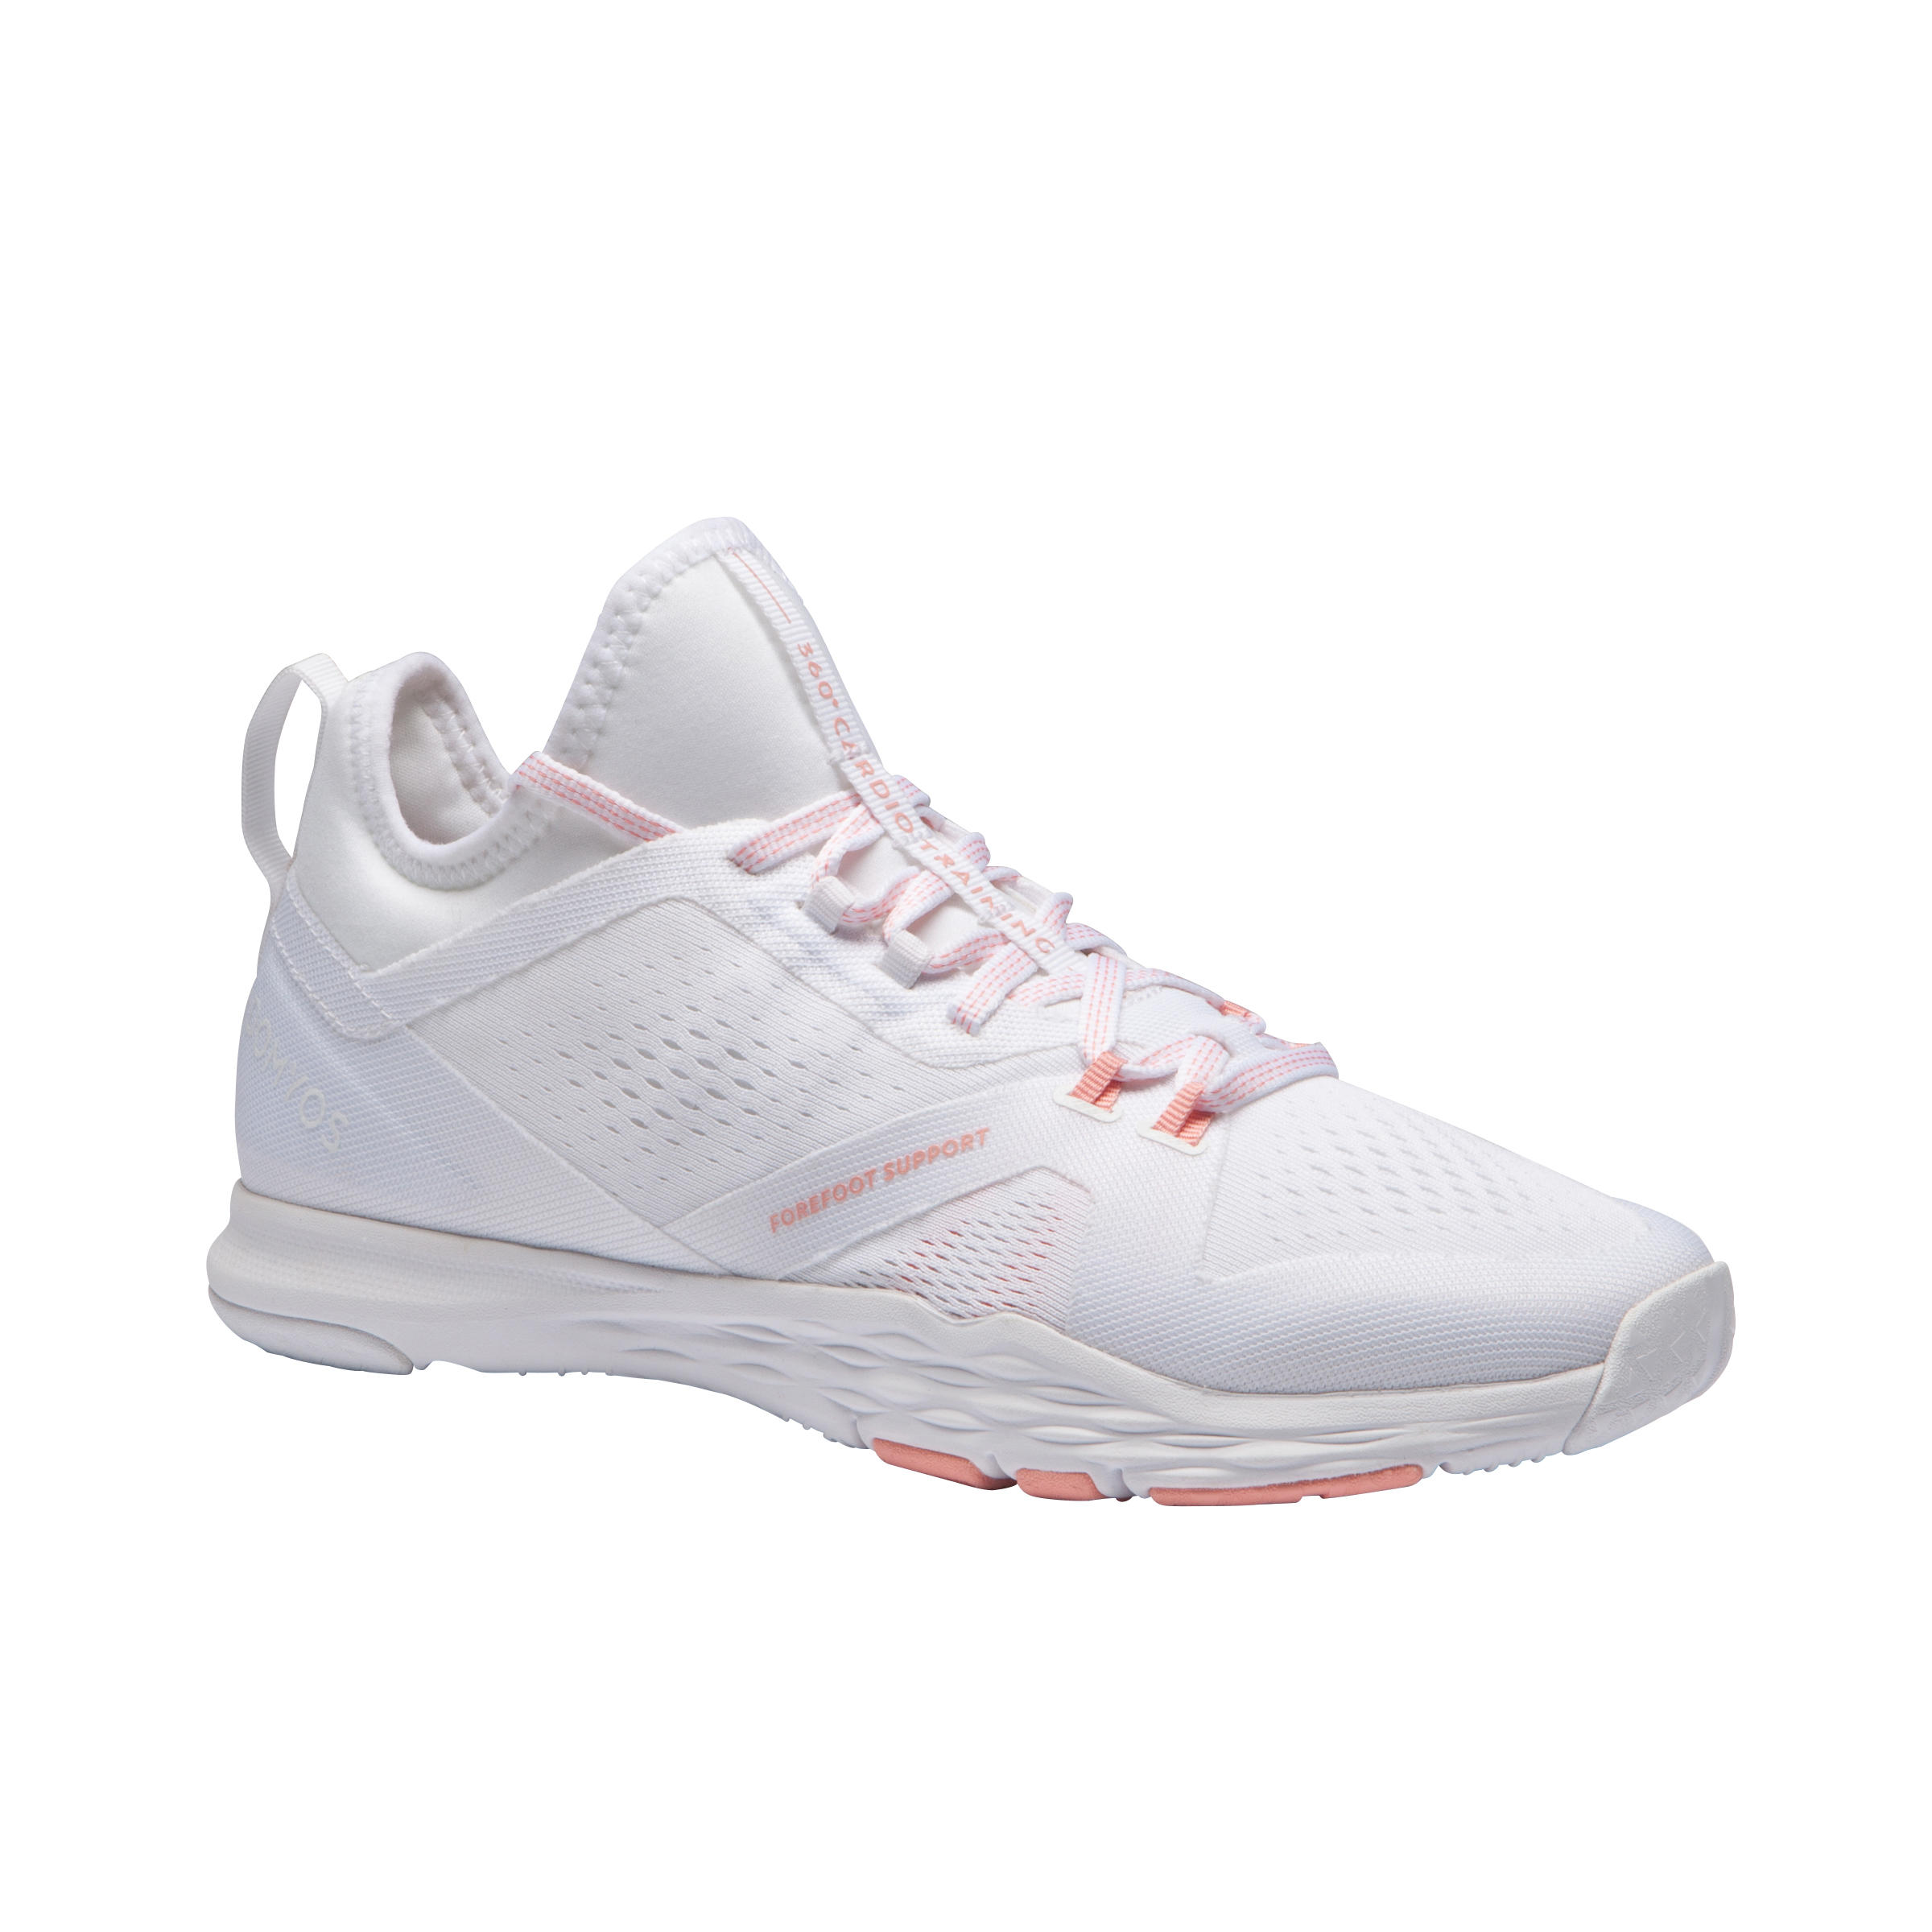 Buy Gym Shoes for Men and Women Online 